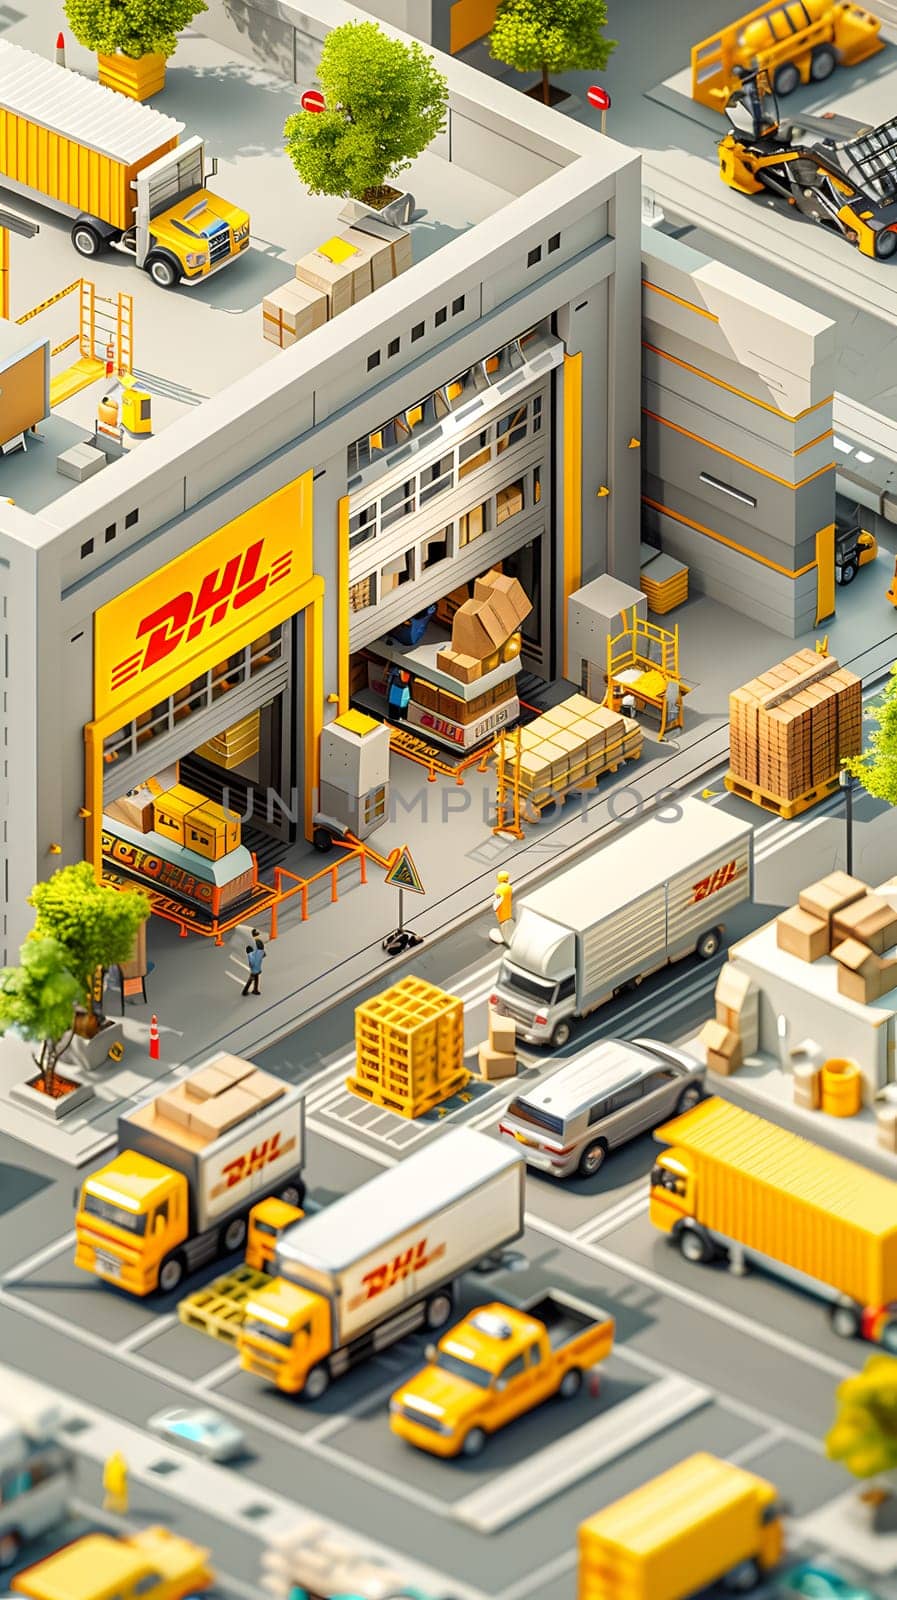 A yellow DHL warehouse with trucks and cars surrounding it. The urban design of the building is highlighted by the lineup of vehicles